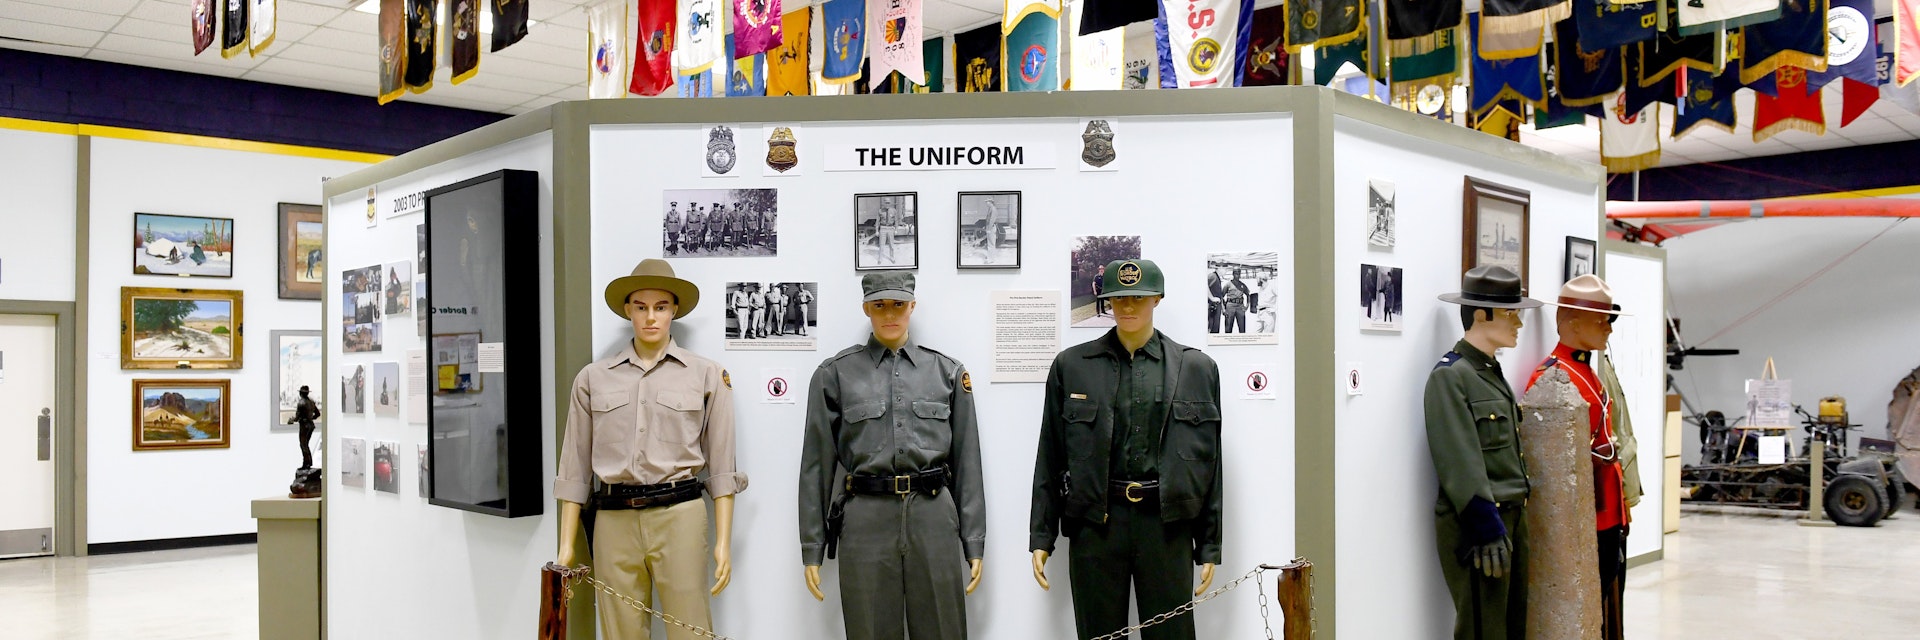 EL PASO, TX - APRIL 24:.The National Border Patrol Museum, open Tuesday through Saturday, with no admission fee, chronicles the agency before it became an agency from the early 1900's through Prohibition, World War II and into today's high tech world  April 24, 2018 in El Paso, TX. It receives no federal funding and relies on donations.  .(Photo by Katherine Frey/The Washington Post via Getty Images)